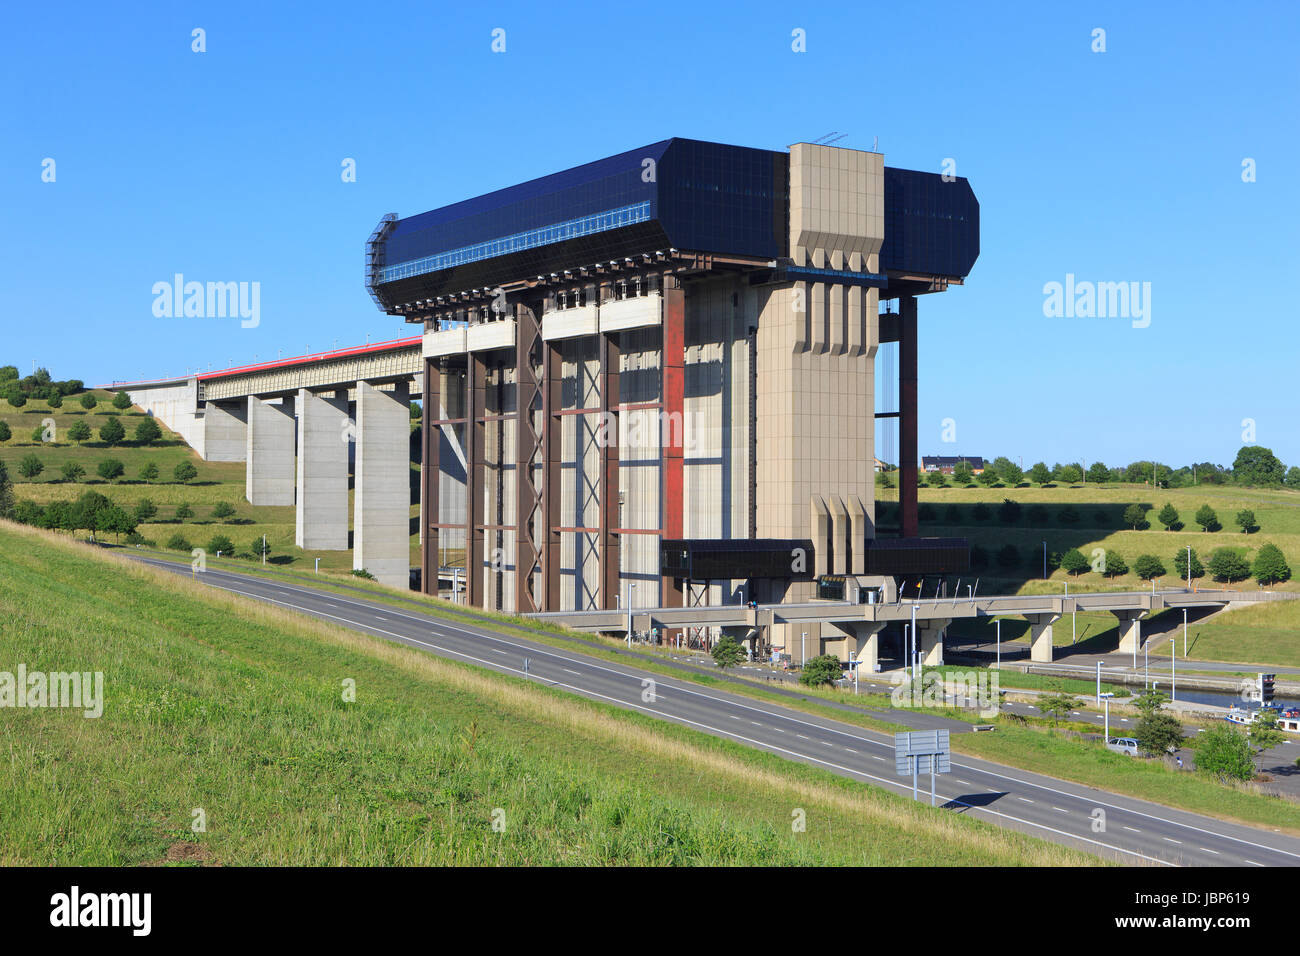 The world's largest double boat lift (opened in 2002) at Strepy-Thieu , Belgium Stock Photo